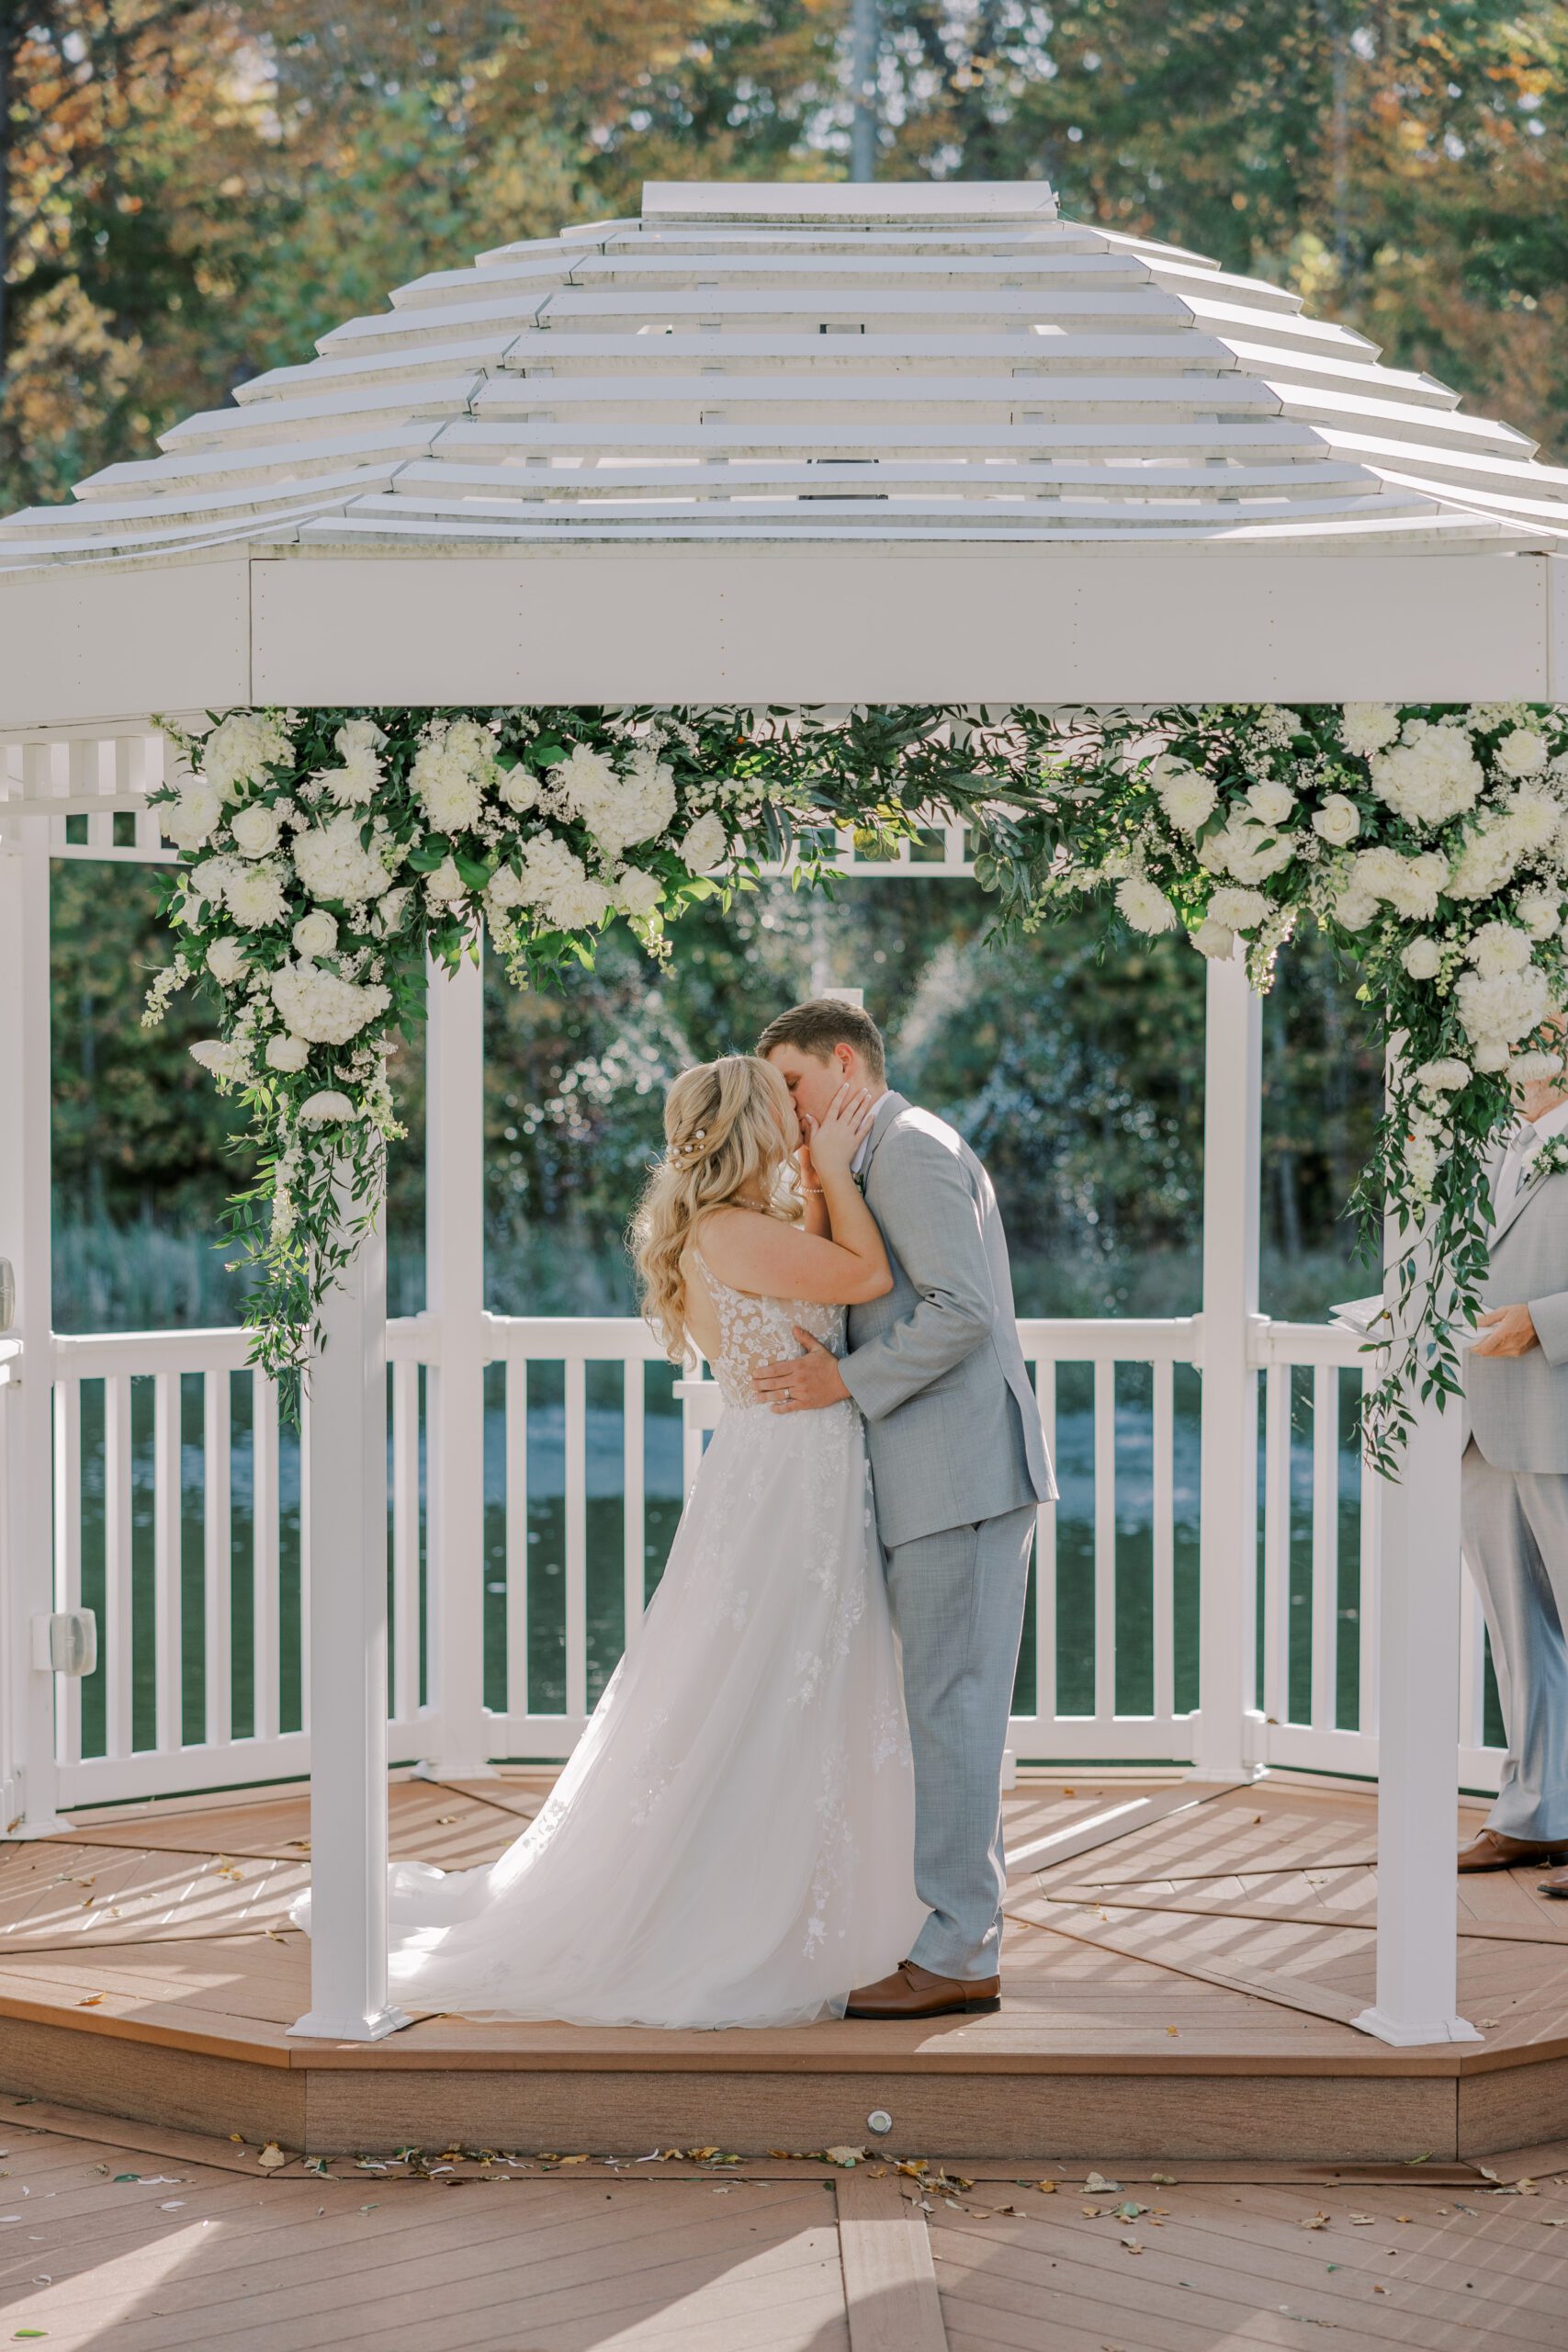 Bride and groom kissing under the white gazebo, groom's hands on are on bride's waist and bride's hands are on grooms face